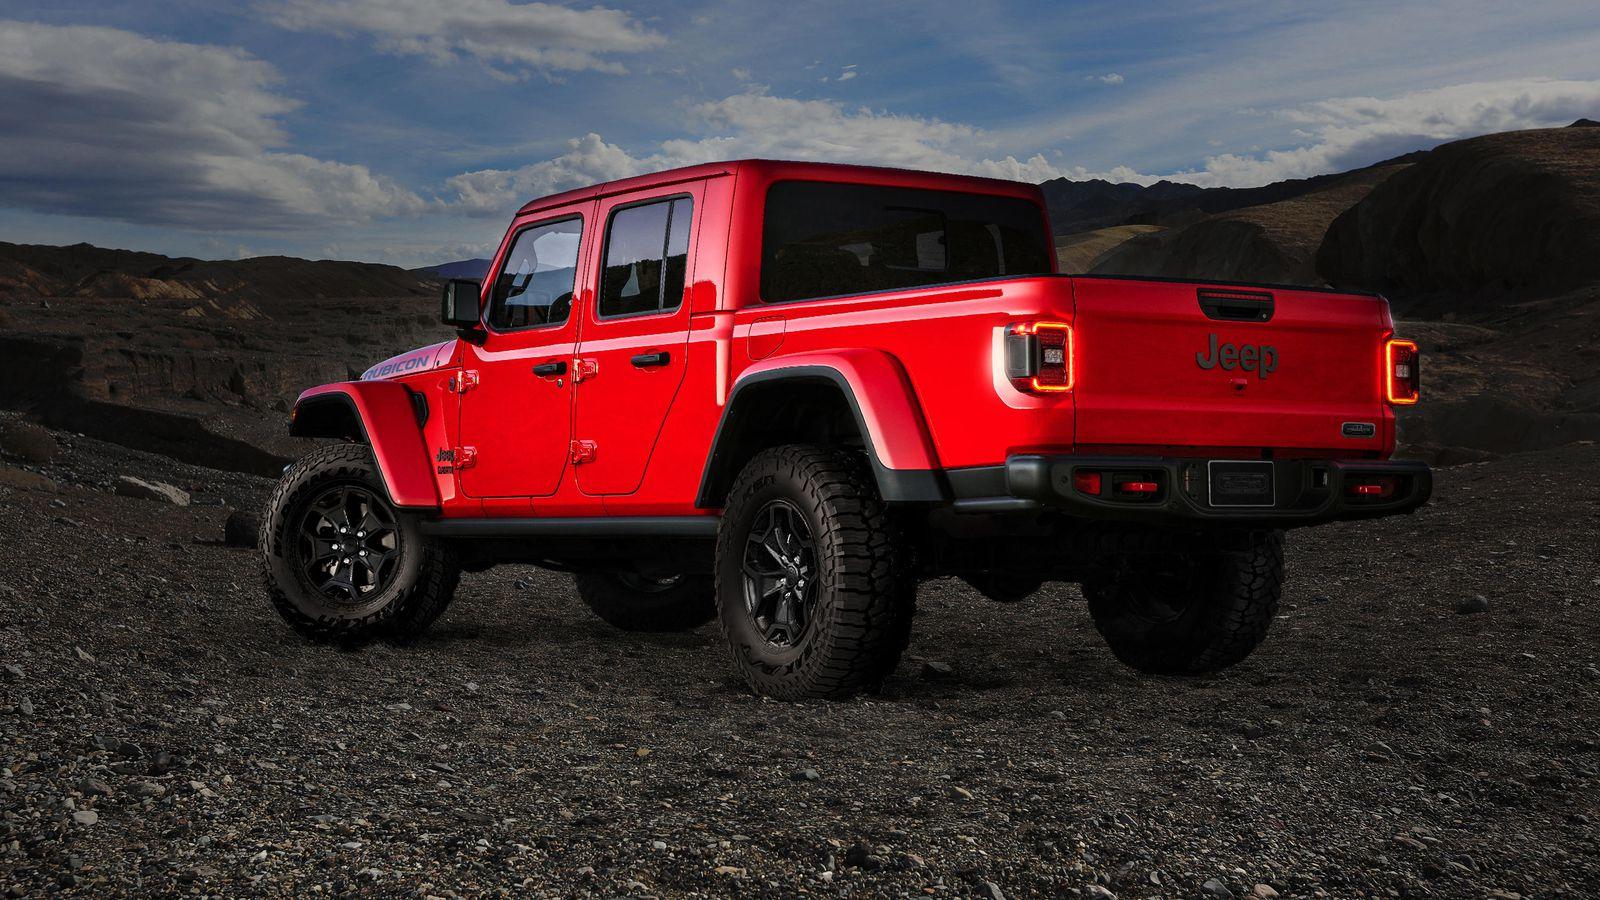 Jeep Gladiator Launch Edition: The order books open